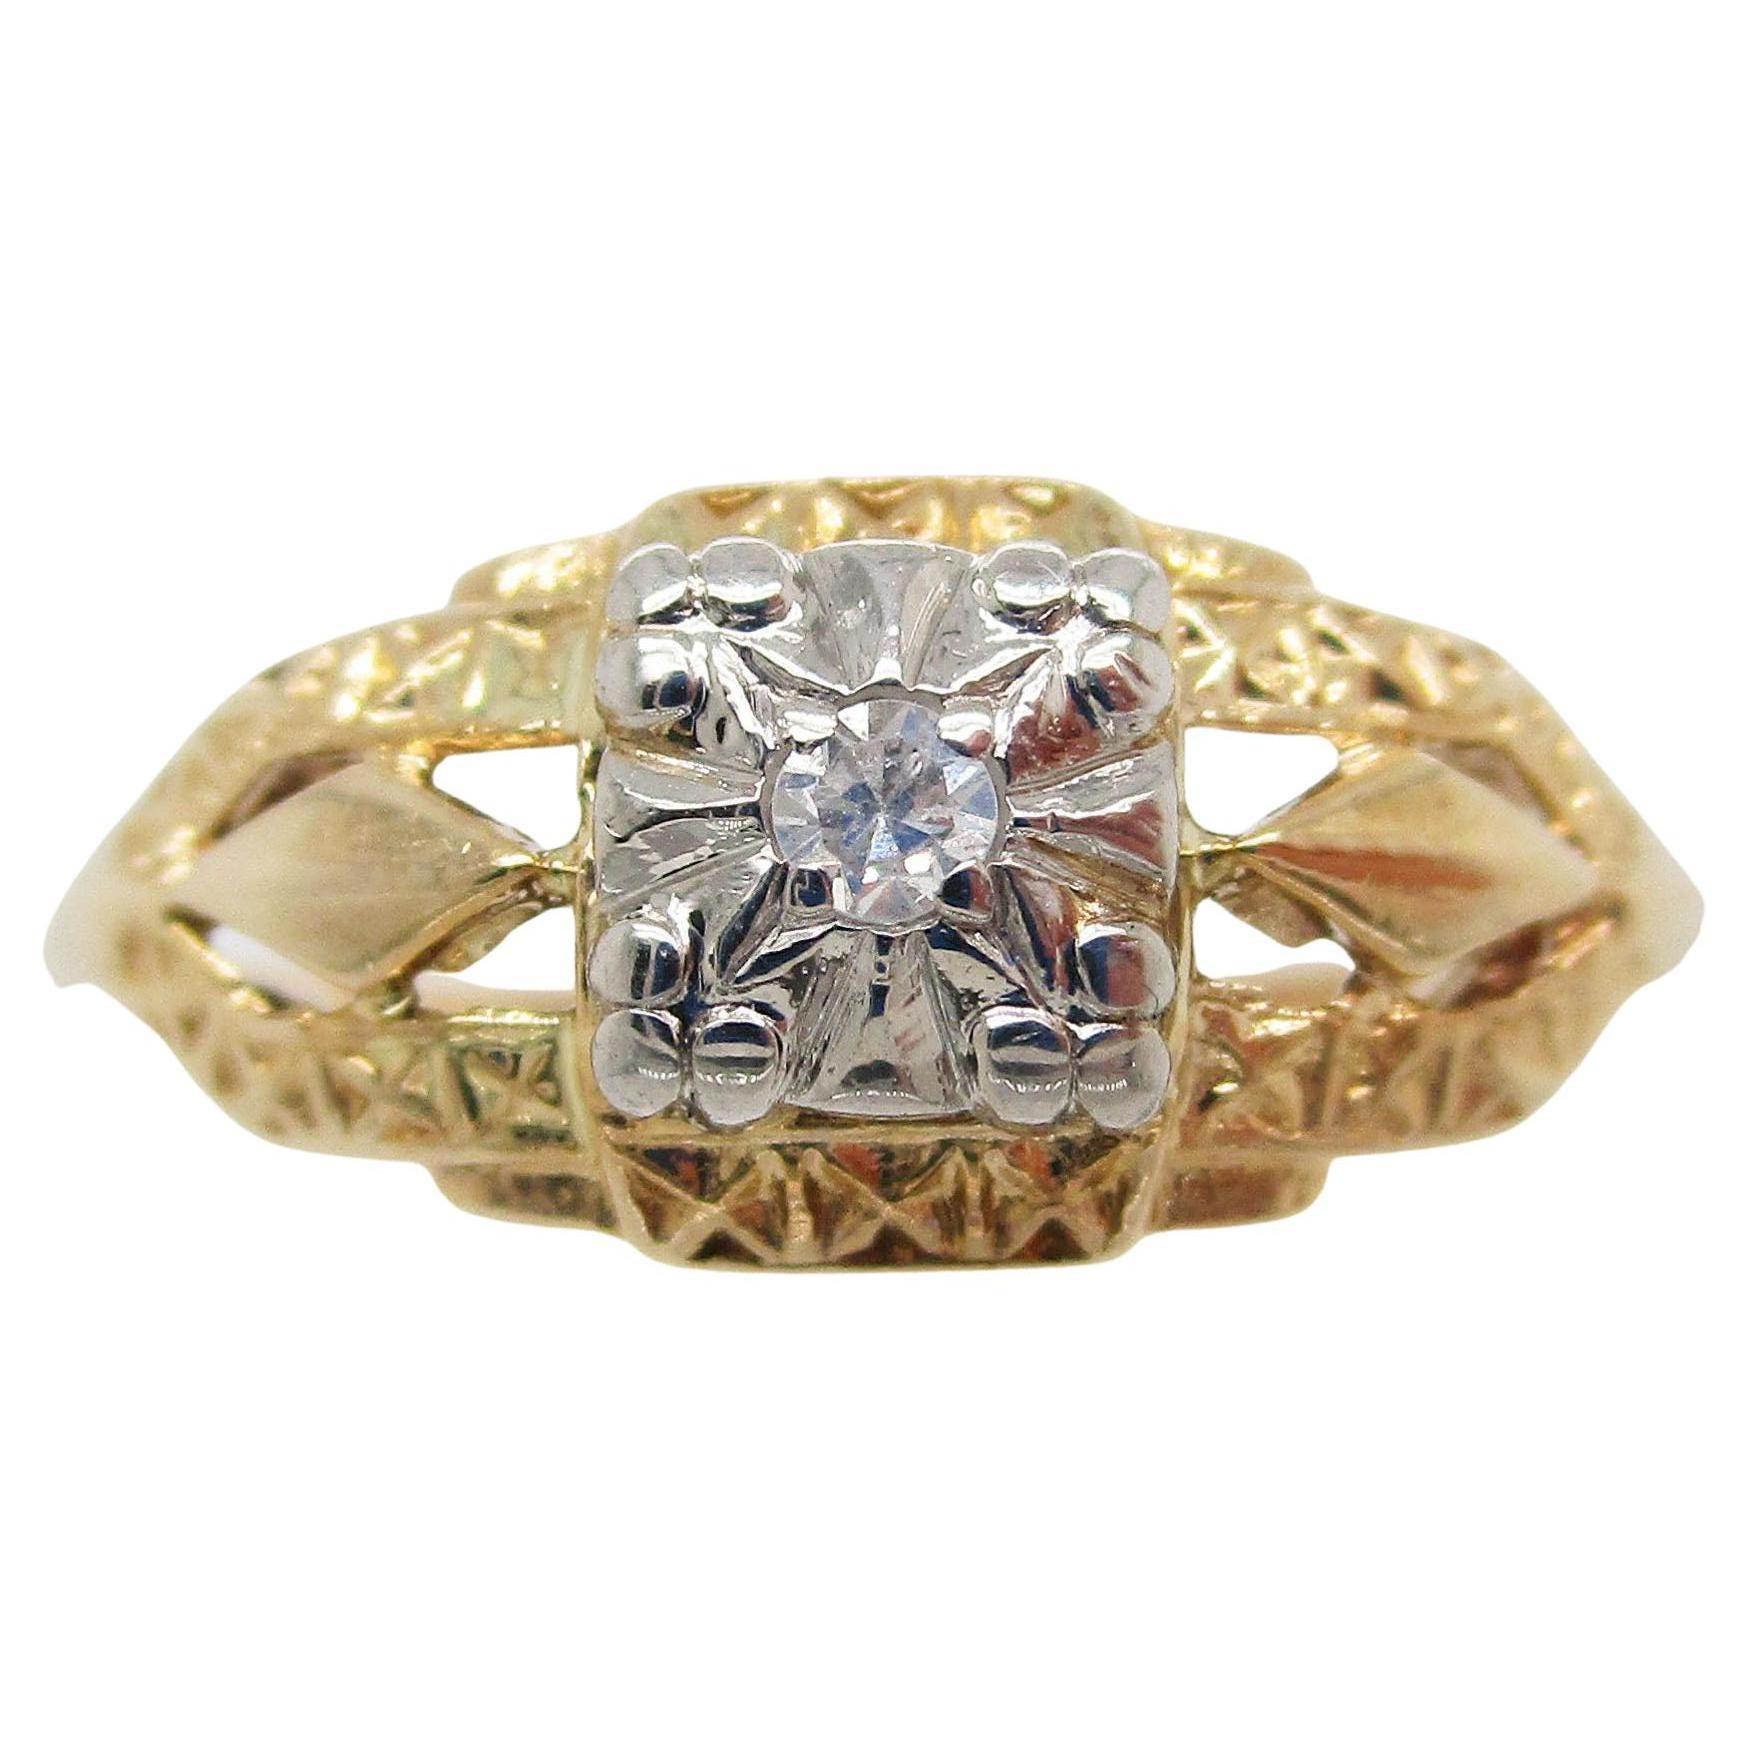 Vintage Mid-Century 14 Karat White and Yellow Gold Diamond Engagement Ring For Sale